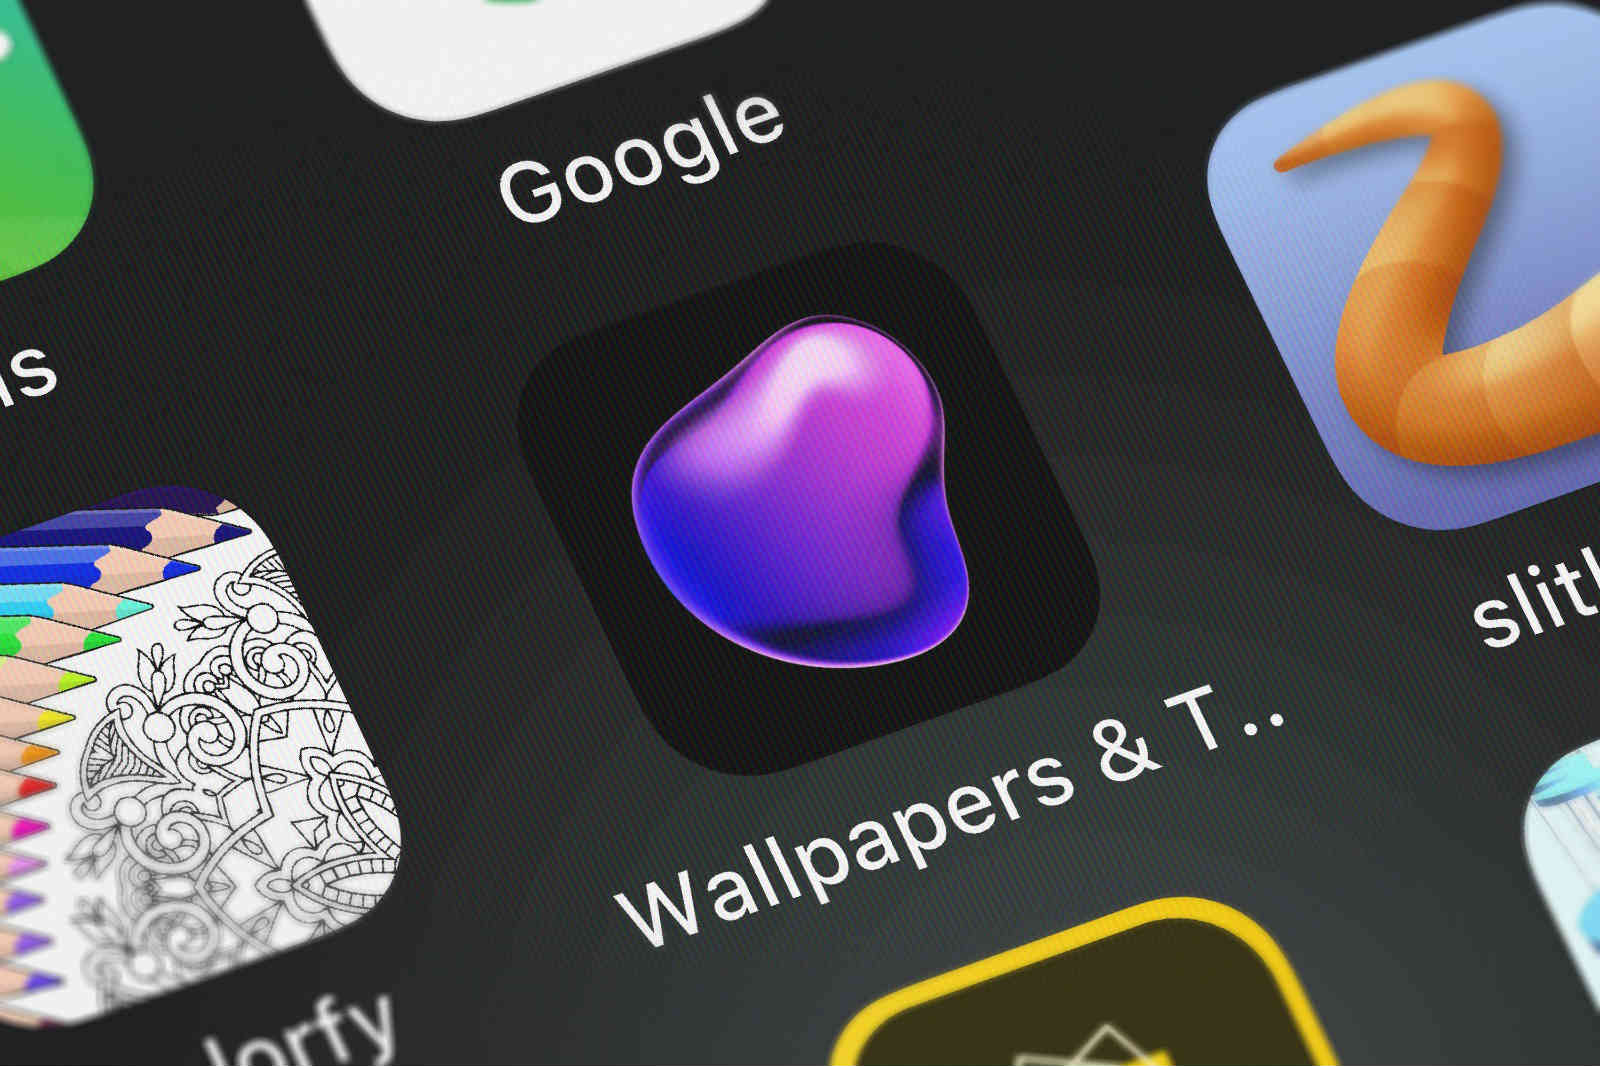 Wallpaper Apps for iPhone 2020